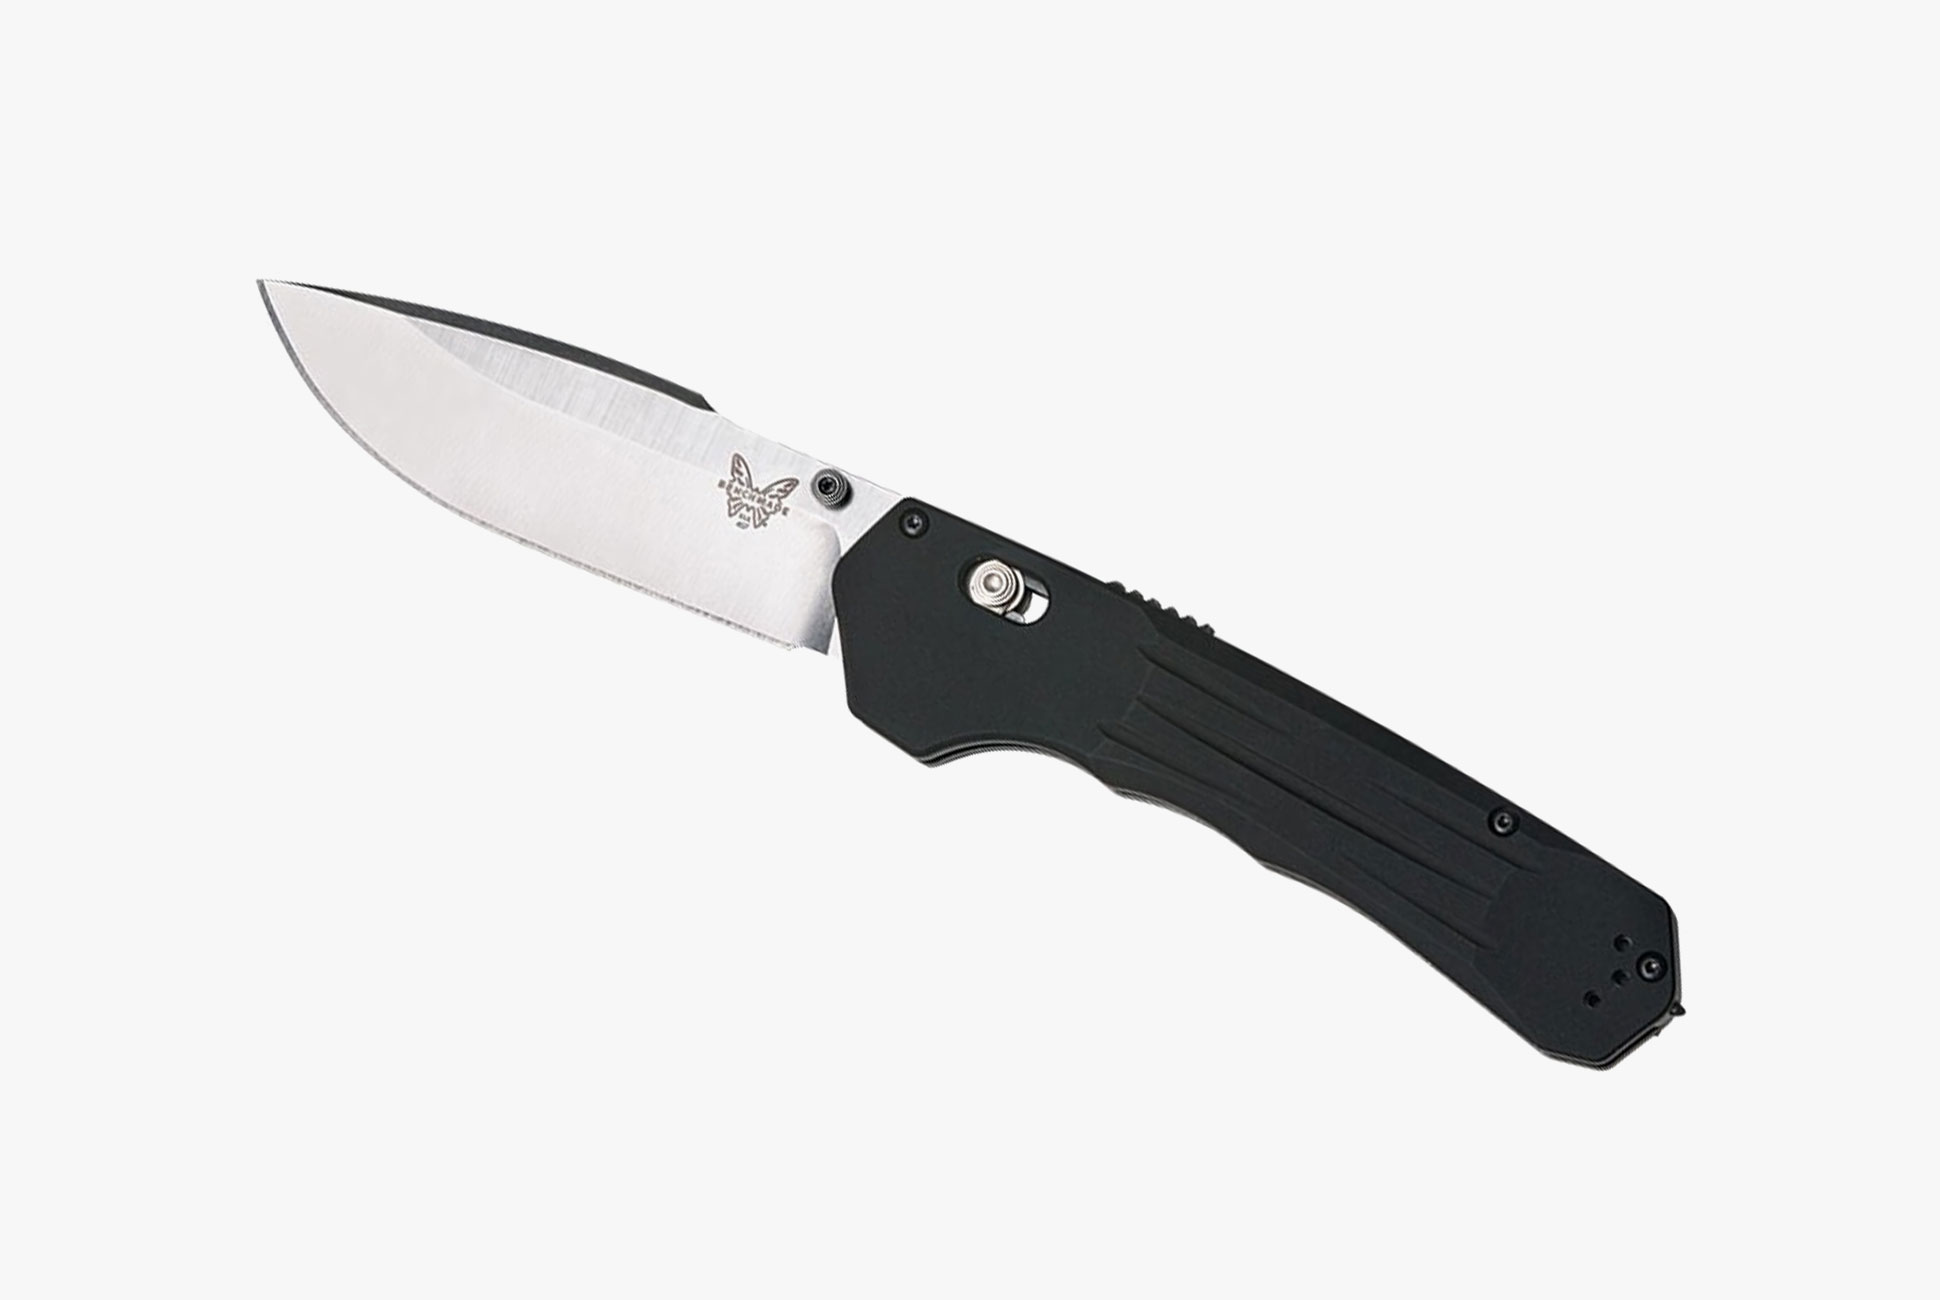 Benchmade 407 Automatic Knife: Gorgeous — and Finally Available